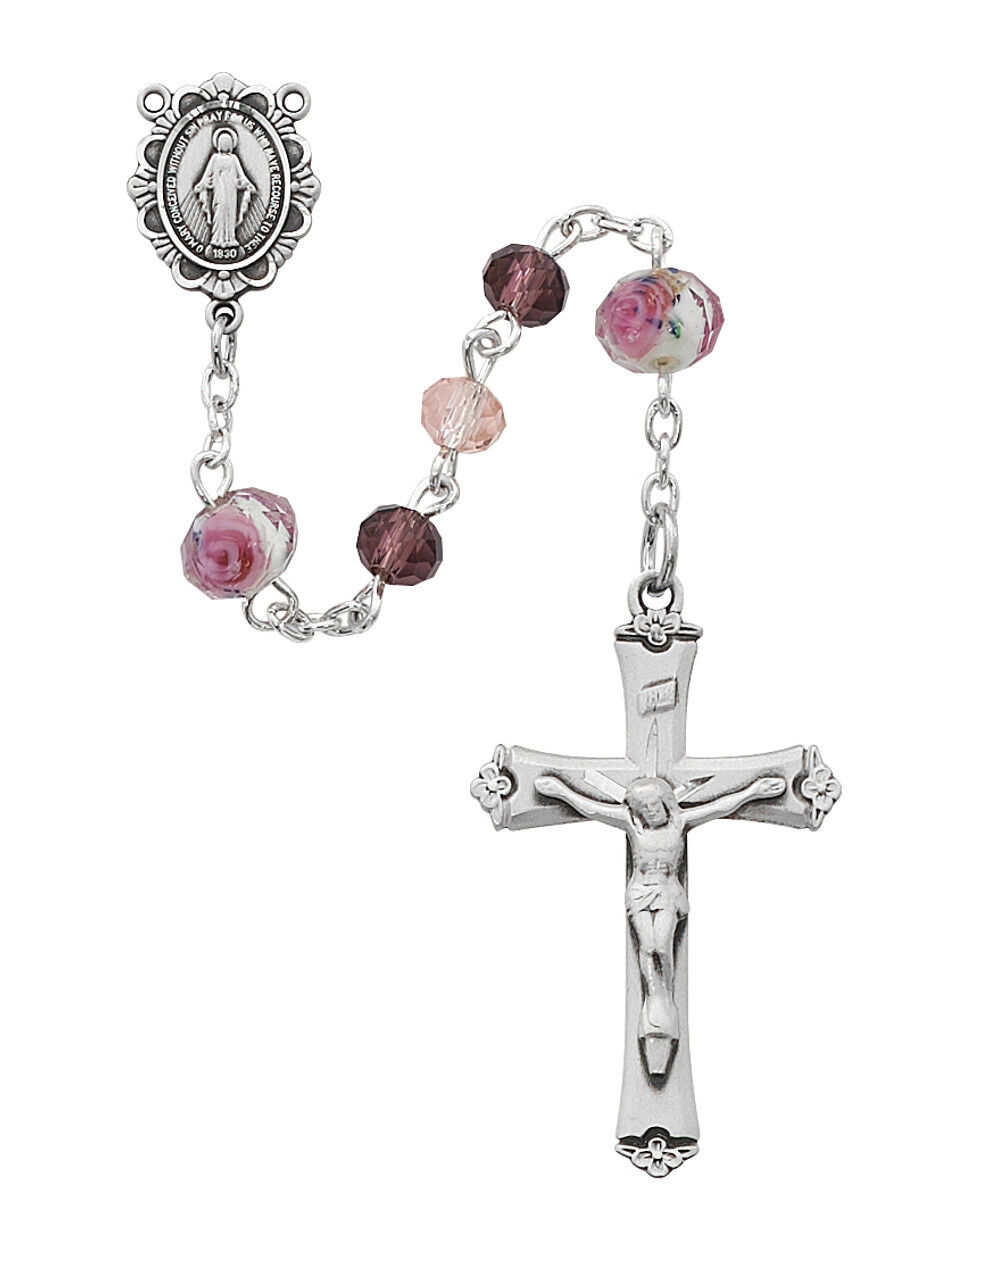 Pink And Purple Bead Rosary Sterling Silver Center And INRI Crucifix 7mm Beads